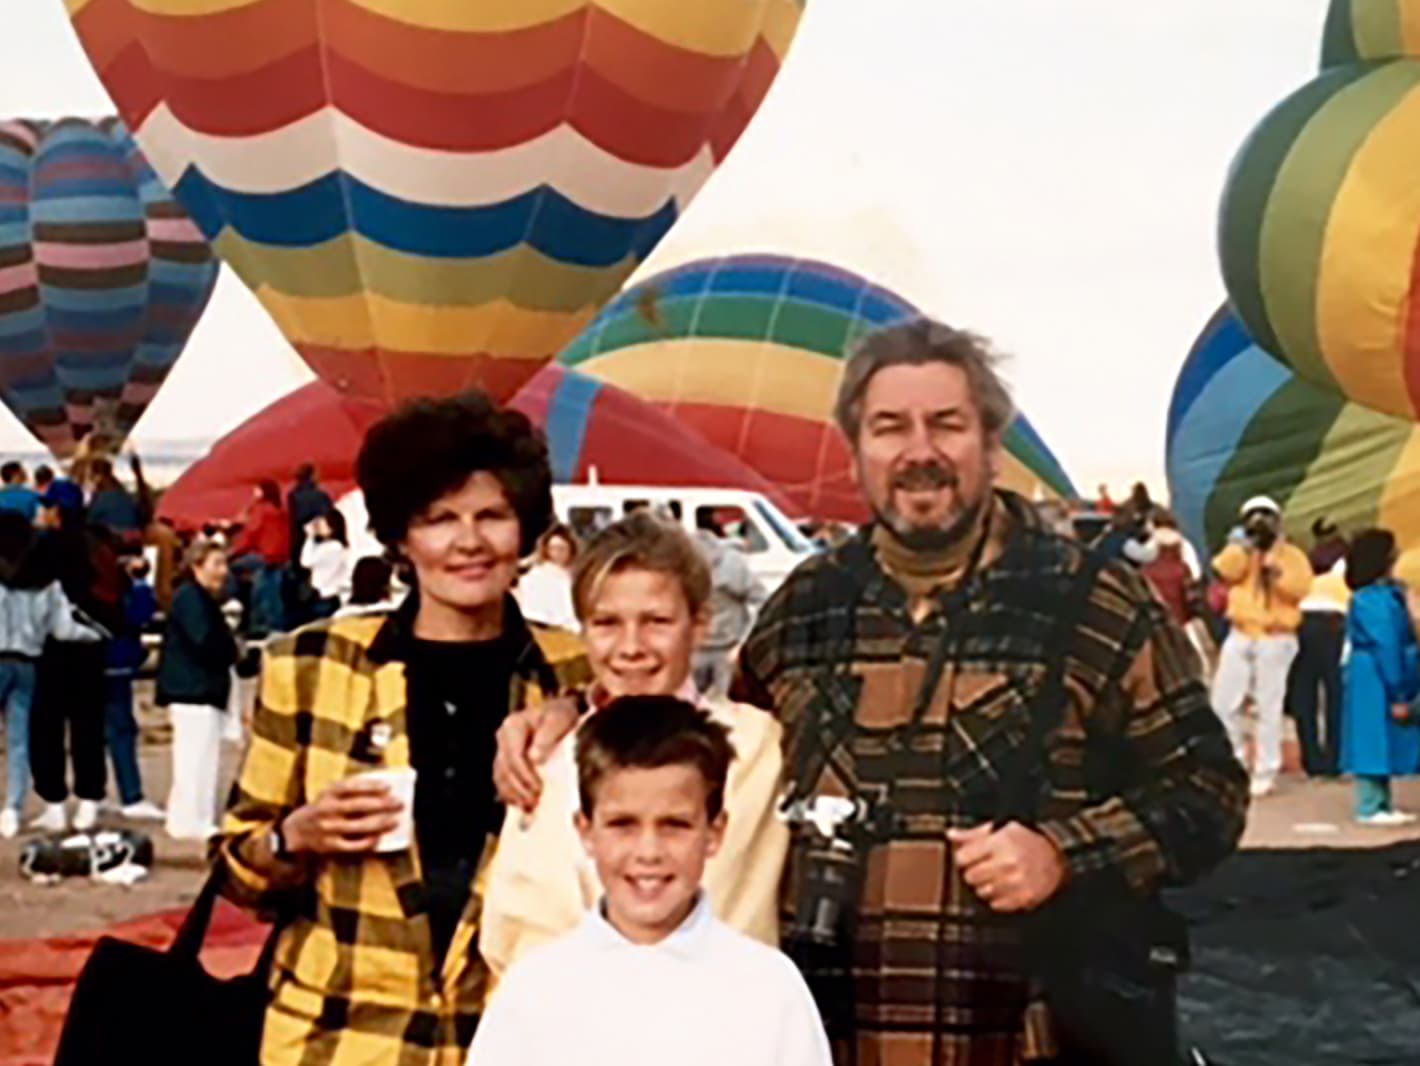 A family visits the balloon fiesta in the 90s